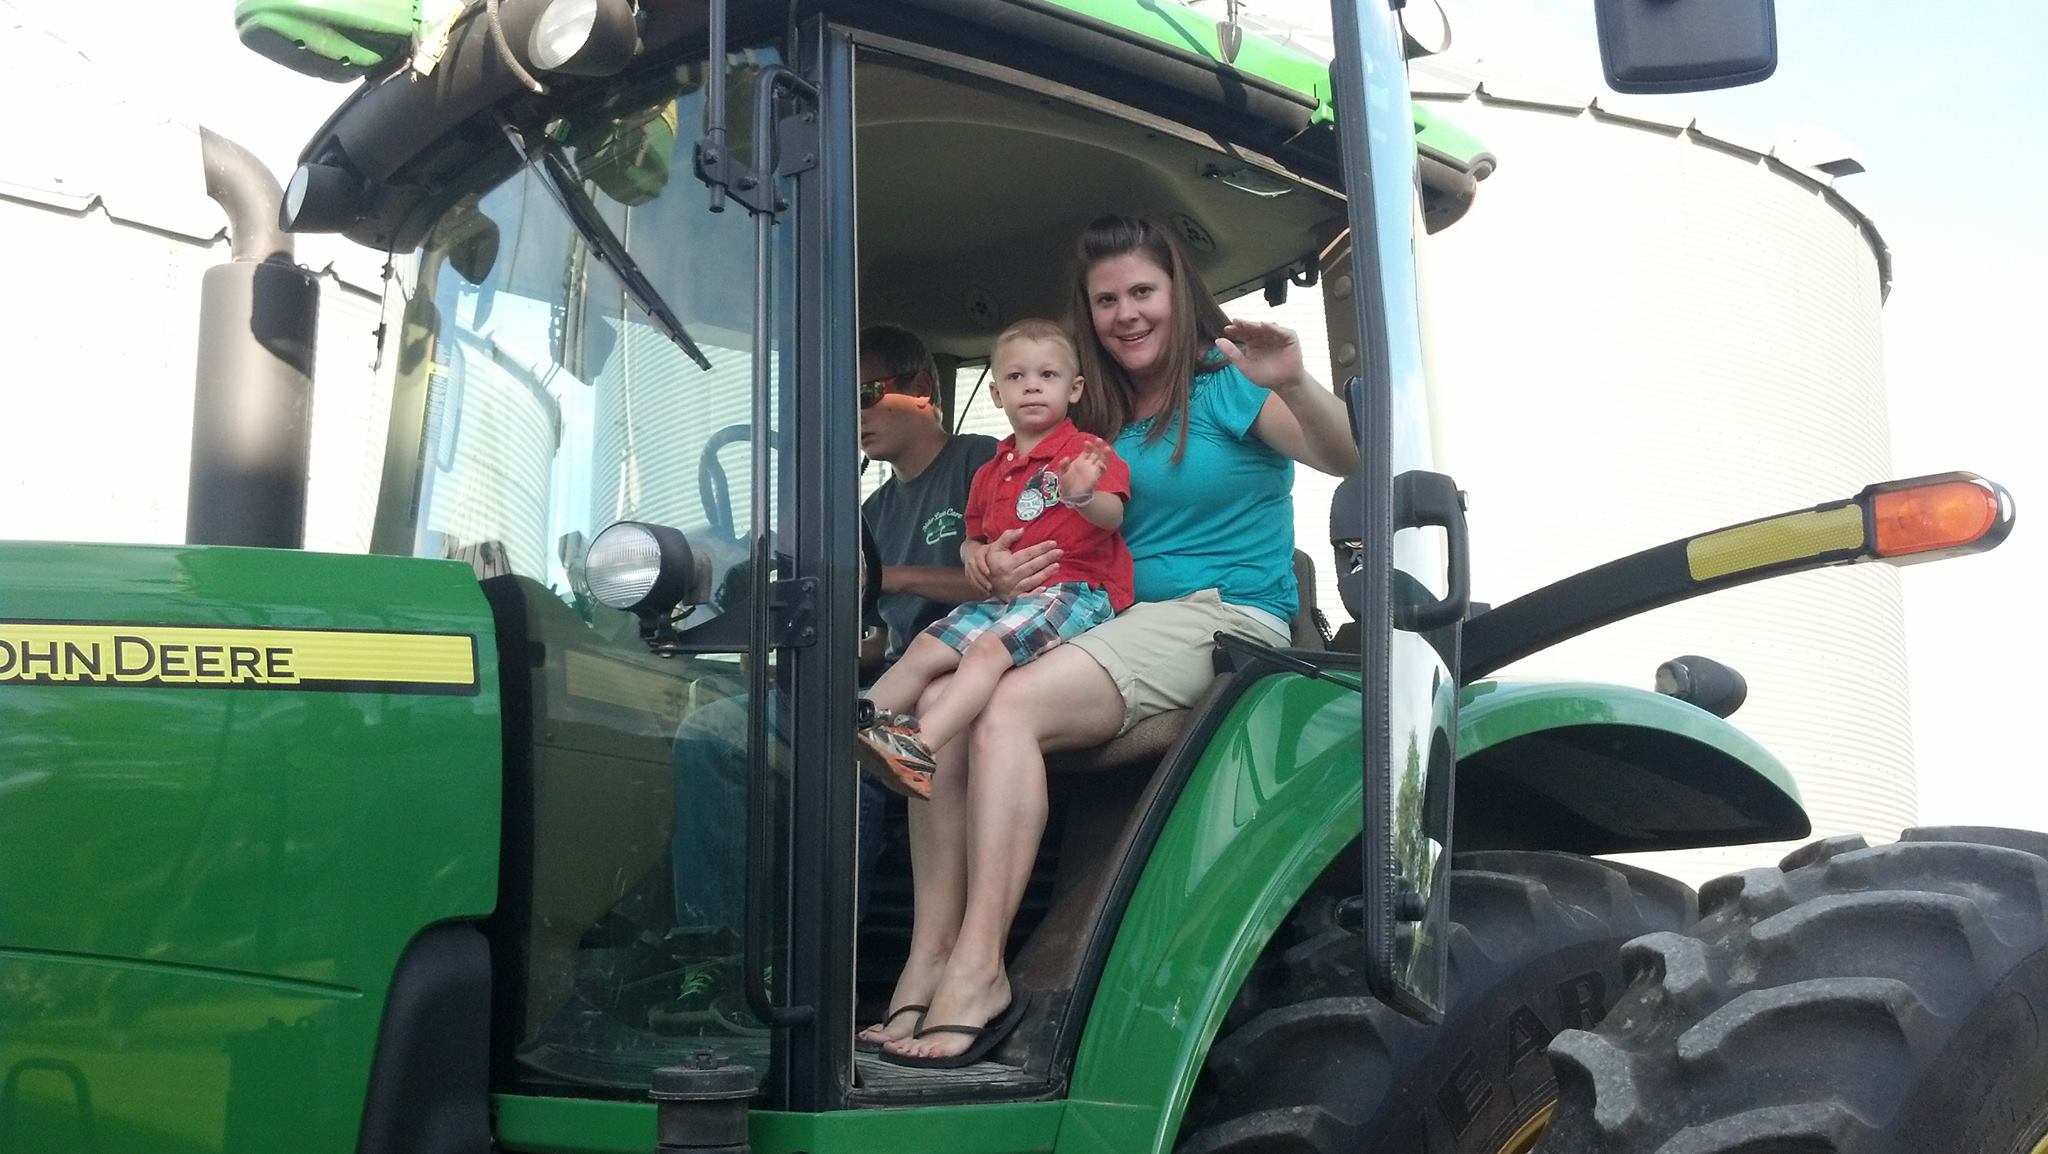 The bigger tractor the better.